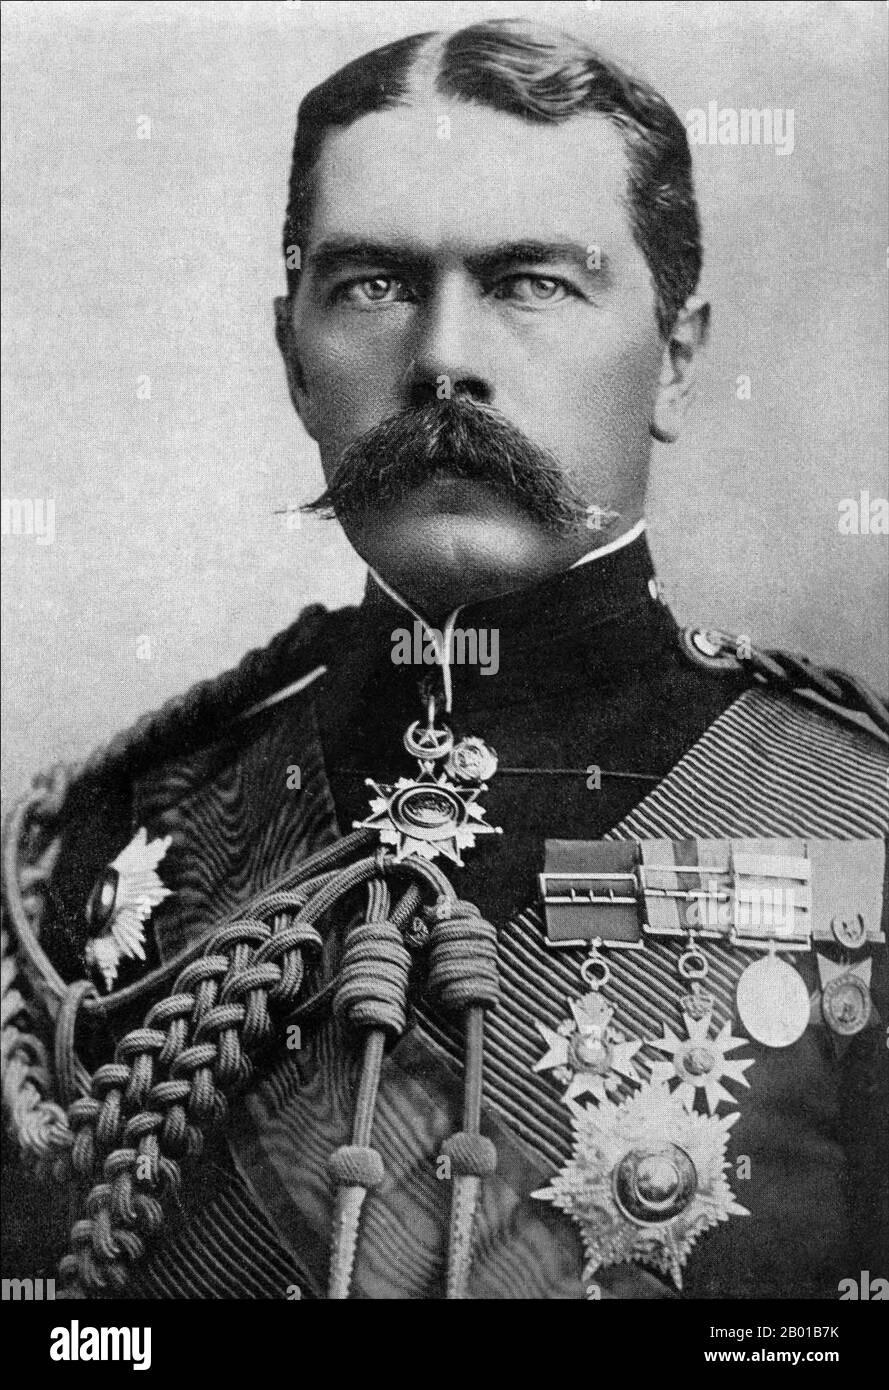 United Kingdom: Field Marshal Horatio Herbert Kitchener, 1st Earl Kitchener KG, KP, GCB, OM, GCSI, GCMG, GCIE, ADC, PC (24 June 1850 - 5 June 1916), Irish-born British commander, patriot and arch imperialist. Portrait, c. 1888-1898.  Kitchener won fame in 1898 for winning the Battle of Omdurman and securing control of the Sudan, after which he was given the title 'Lord Kitchener of Khartoum'. As Chief of Staff (1900-1902) in the Second Boer War he played a key role in Lord Roberts' conquest of the Boer Republics, then succeeded Roberts as commander-in-chief. Stock Photo